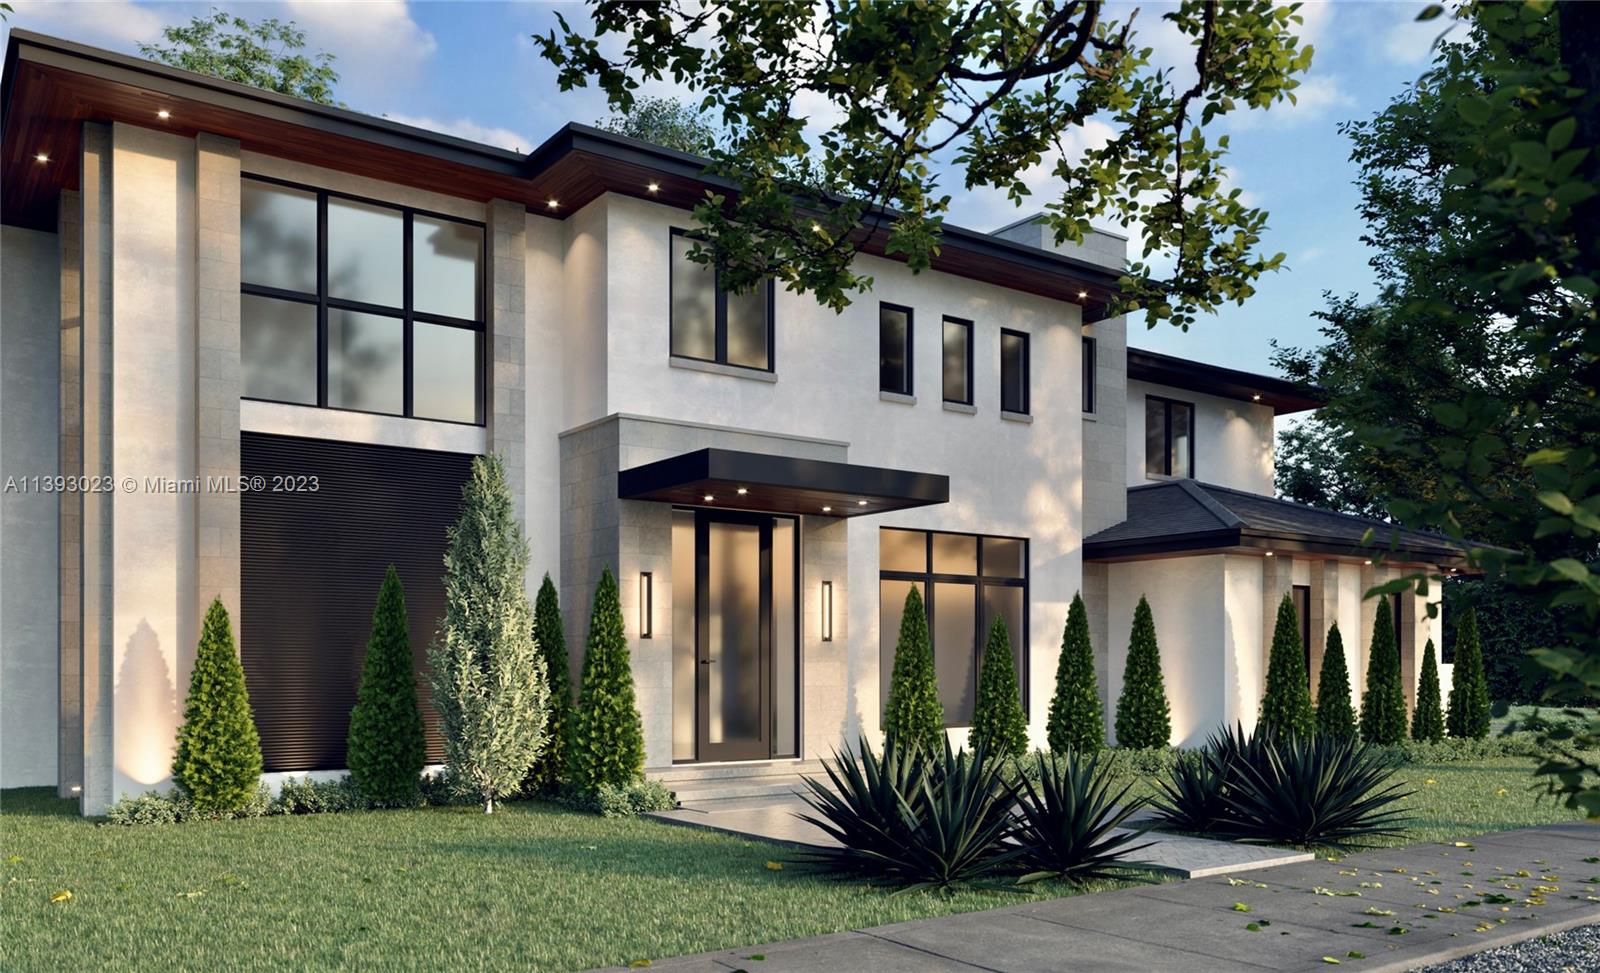 Rare pre-construction opportunity to buy a spectacular new home in the highly sought after Coral Gables neighborhood known as the Platinum Triangle. Expected completion Spring 2024. To be built on a 10,043 SF lot near the Cocoplum Circle, which connects the scenic &amp; tree-canopied roadways of Ingraham Highway, Sunset Drive &amp; Old Cutler Road. Pacheco Architecture has designed this 5618 SF home that features: 6BR’s/6.5BA’s, Subzero &amp; Wolf appliances, porcelain tile flooring, elevator, 2 car garage &amp; pool. Close to all of the best that Miami has to offer: world-class dining &amp; shopping in Coral Gables, Coconut Grove &amp; South Miami and to highly acclaimed schools.